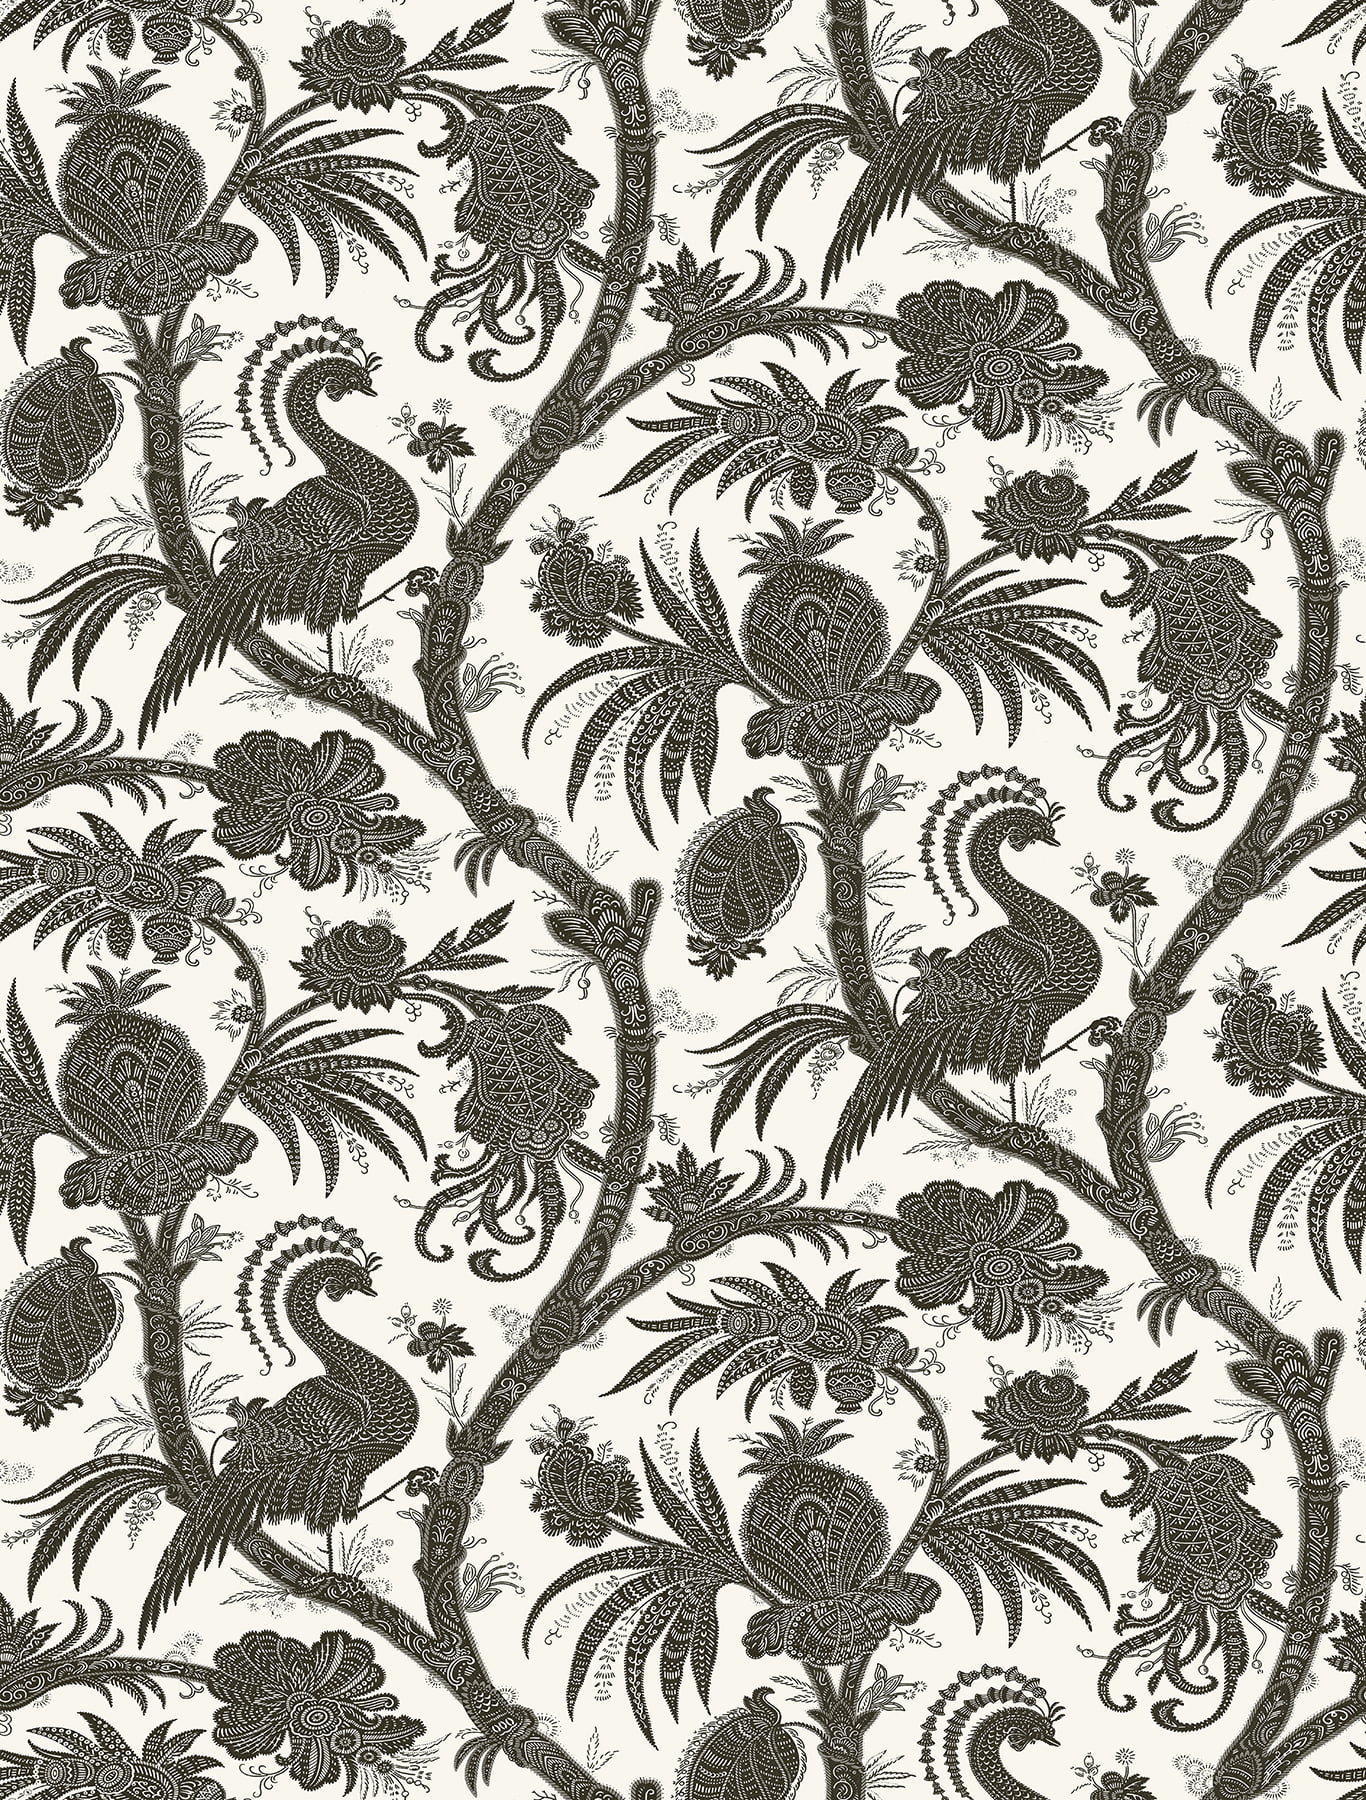 Regal Peacock Peel And Stick Removable Wallpaper